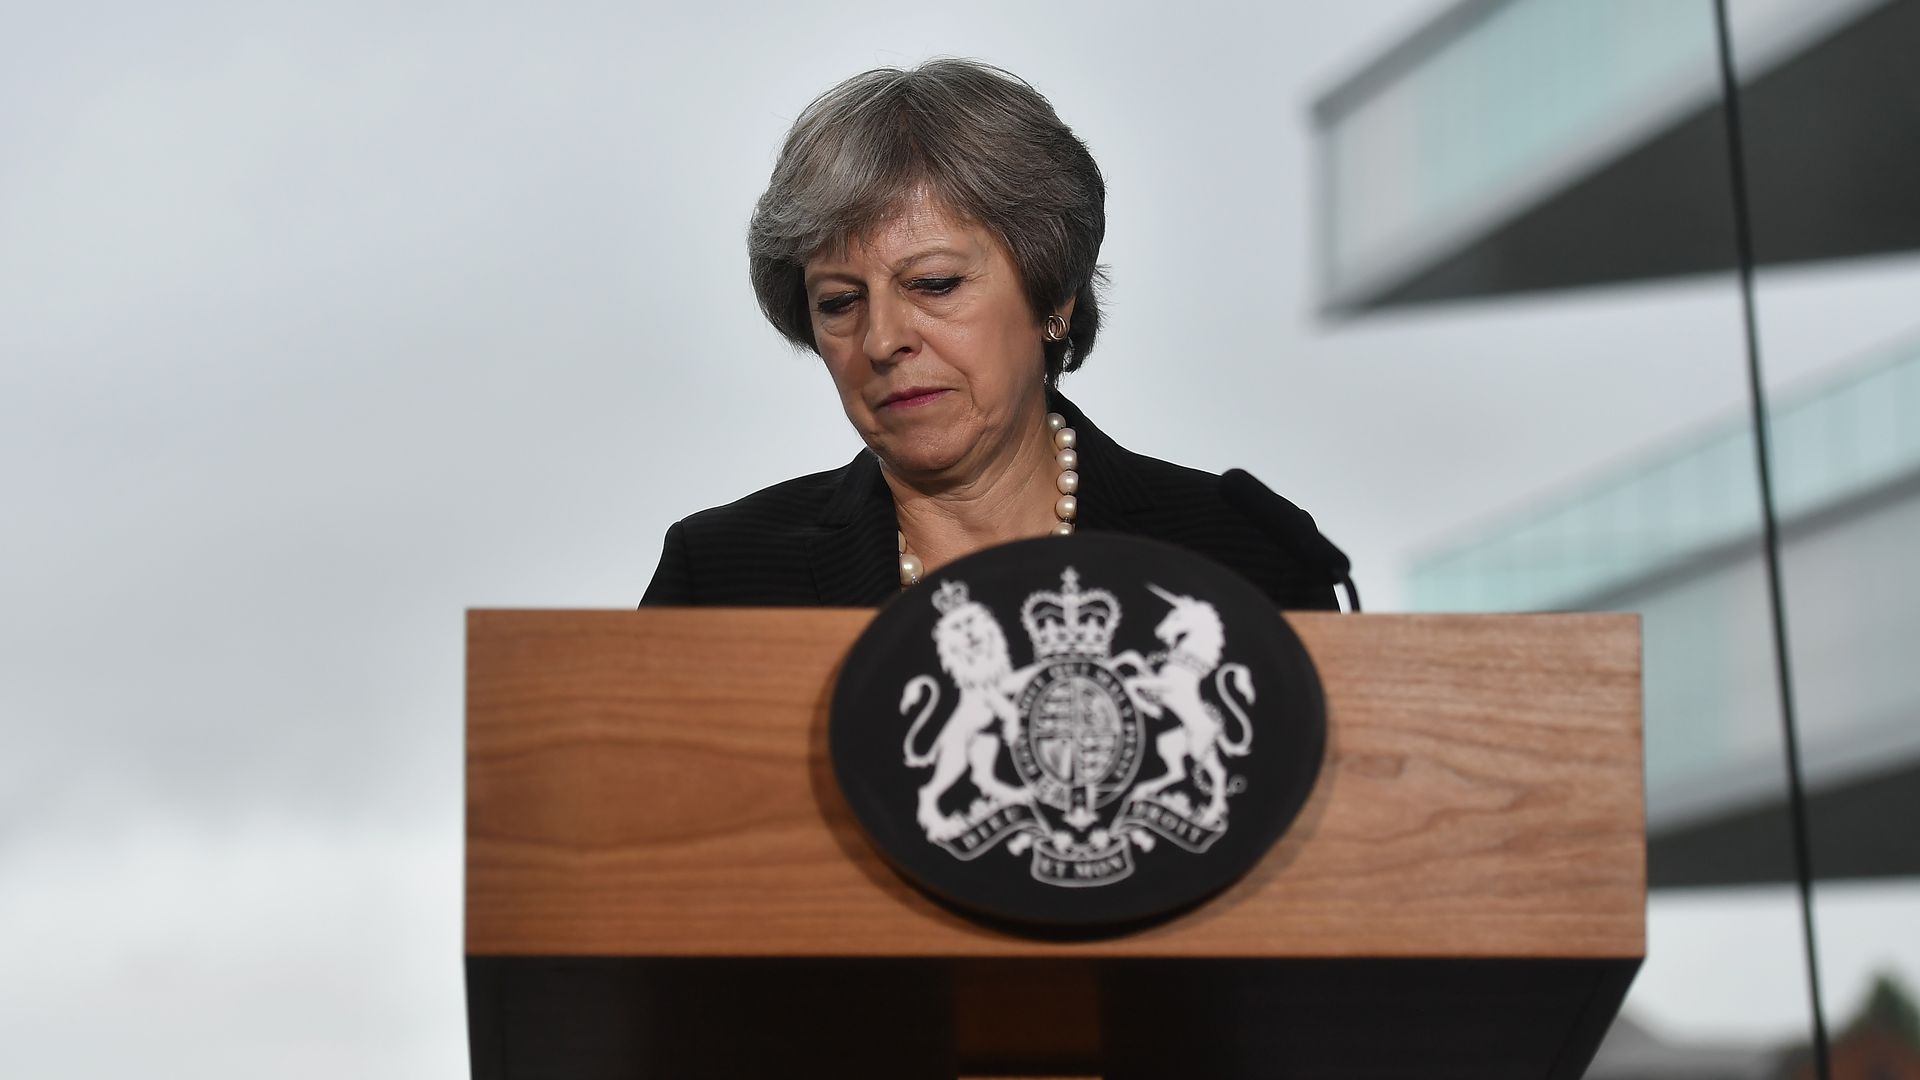 Theresa May during a speech in Belfast, Northern Ireland